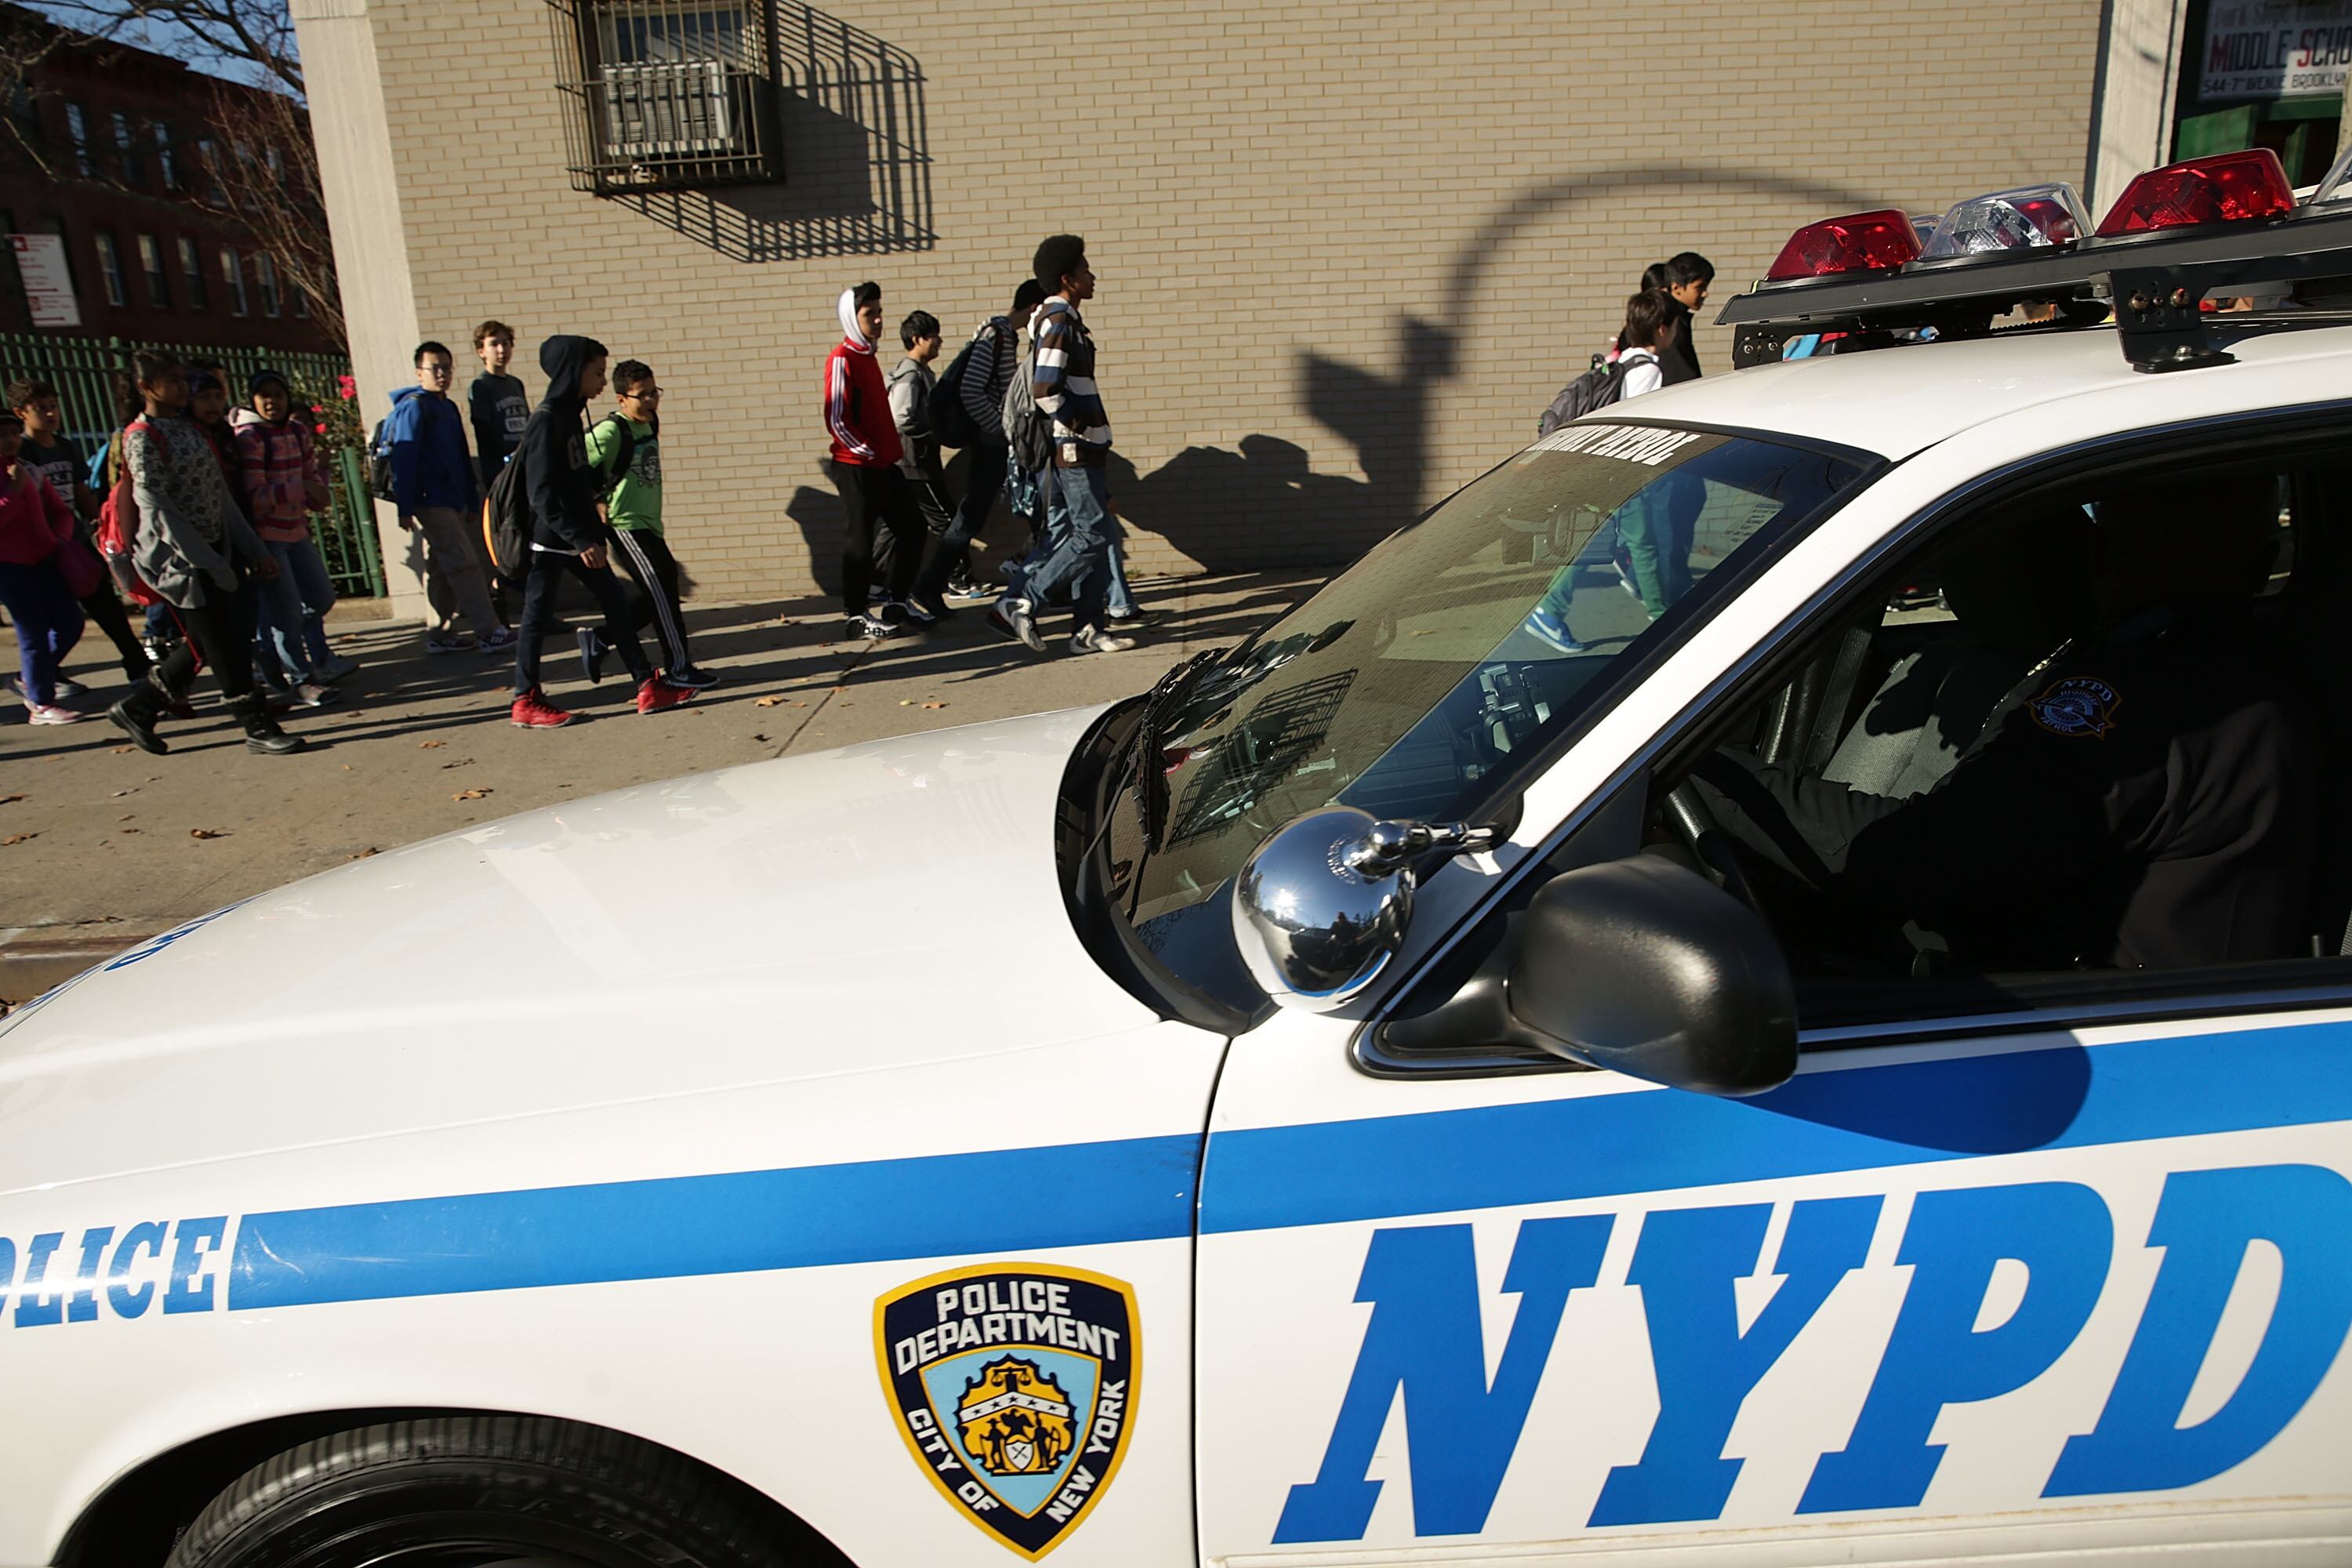 A New York Police Department cruiser sits in the foreground as students walk past on the sidewalk.